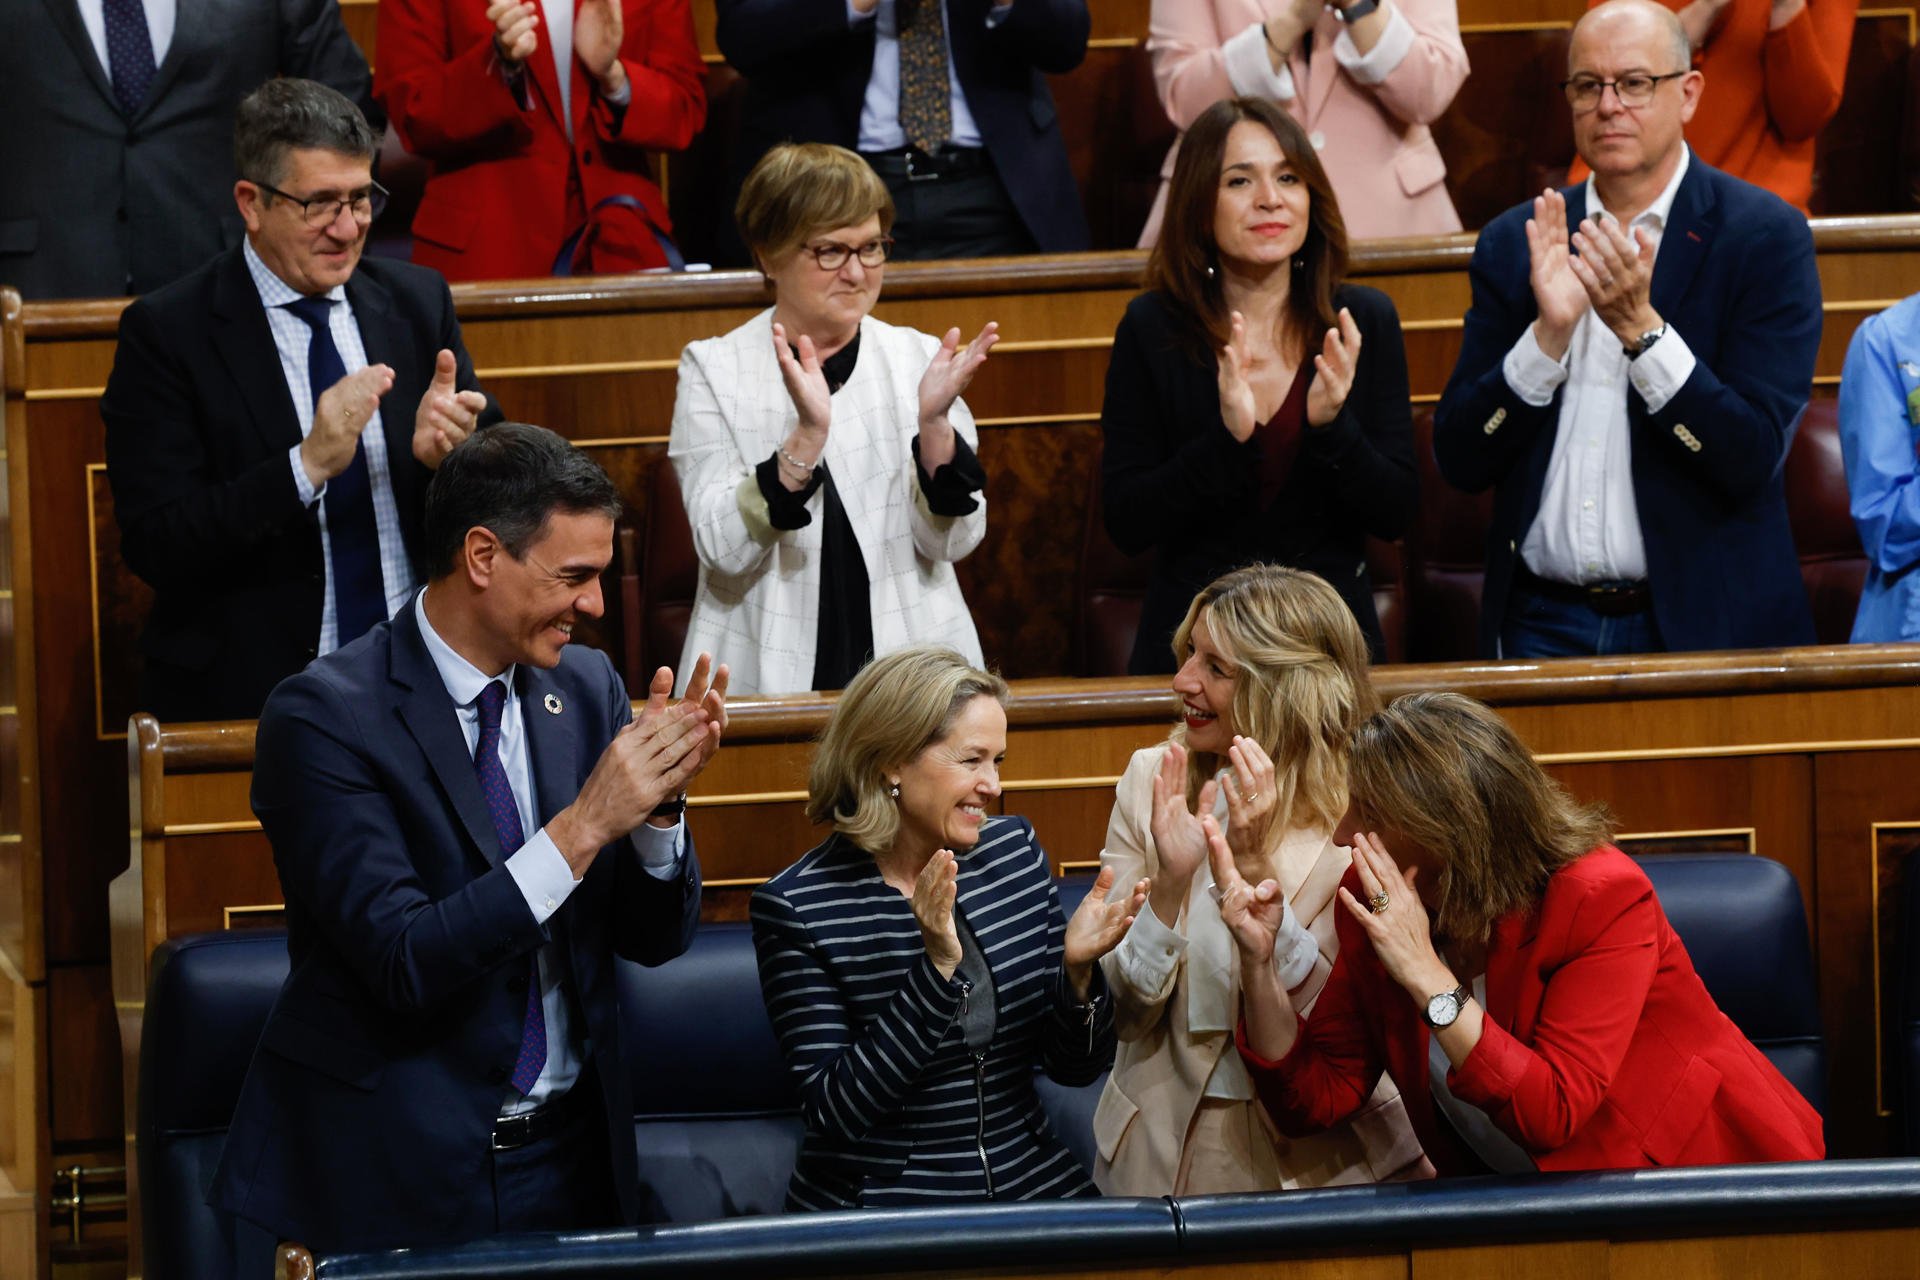 Vox's no-confidence motion fails as expected; PP abstains, Pedro Sánchez reinforced